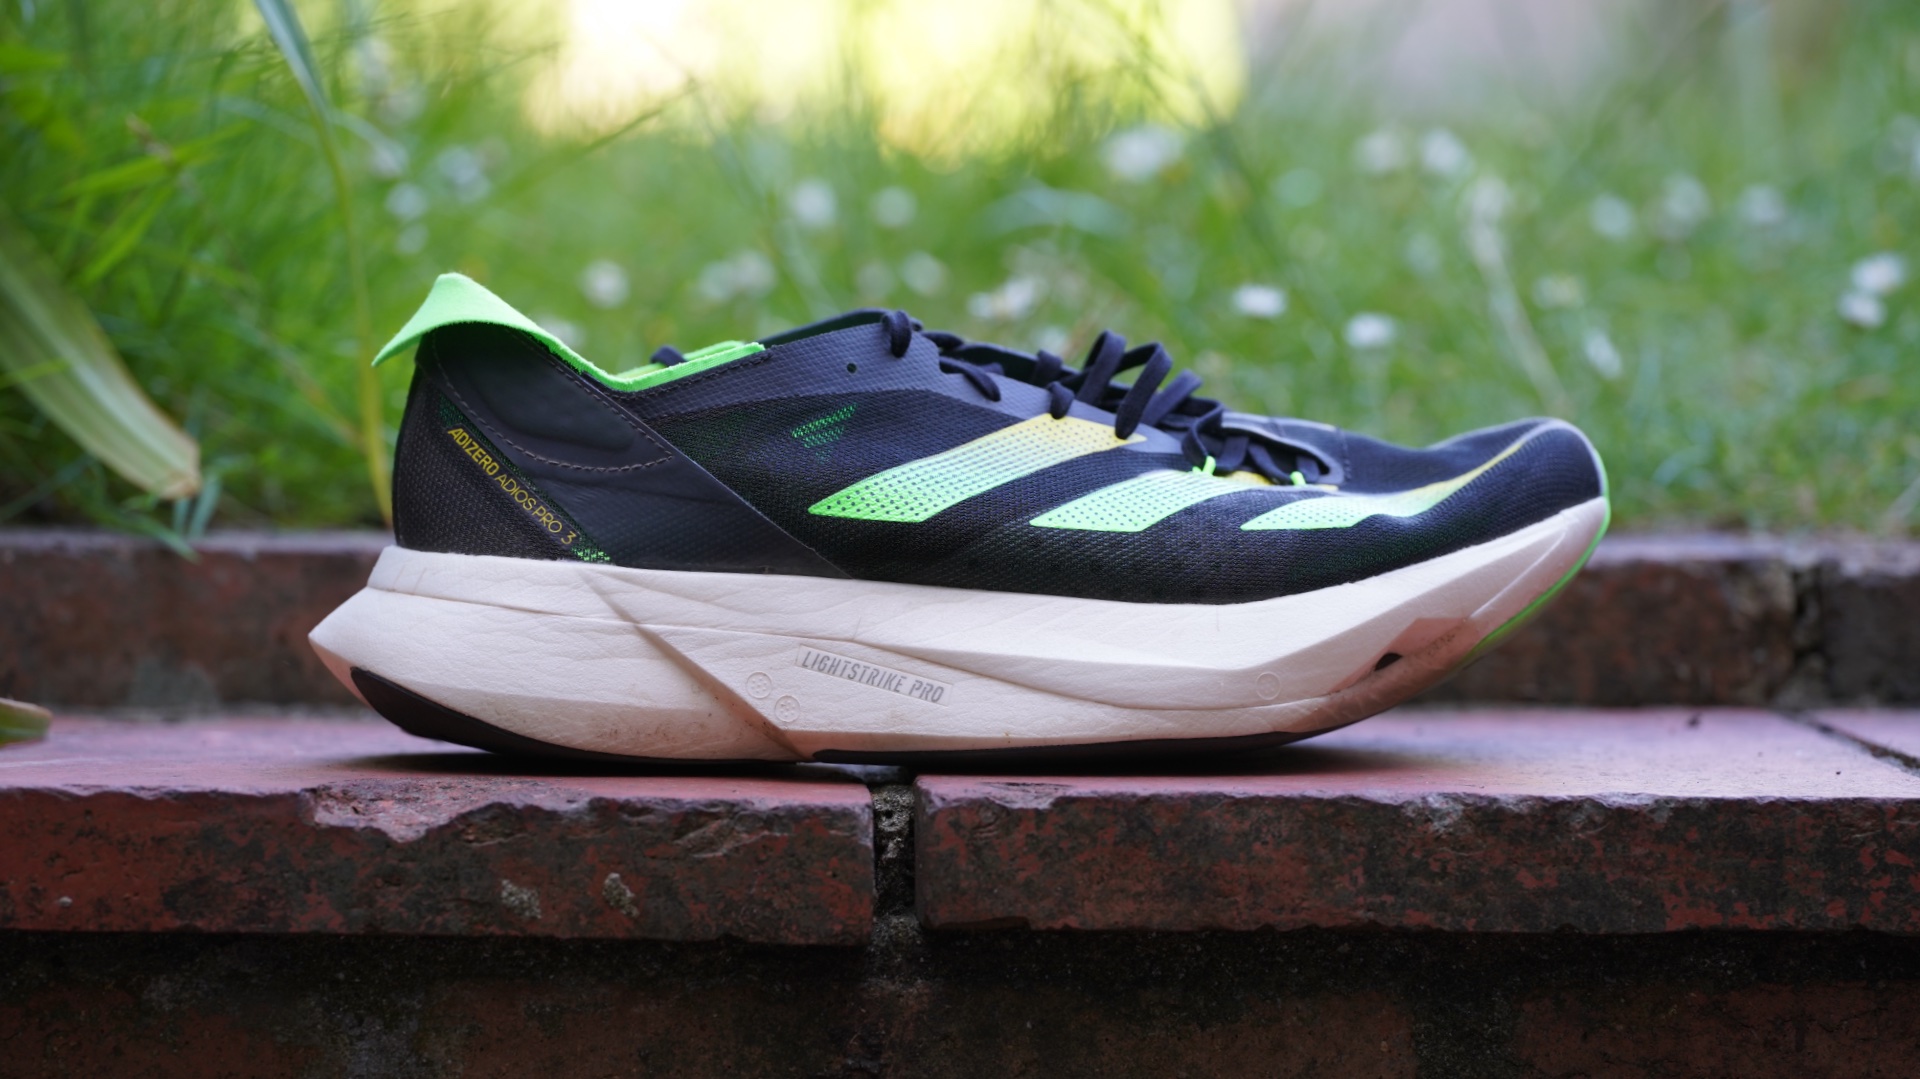 Adidas Adios Pro 3 review – More bounce, less ounce | T3